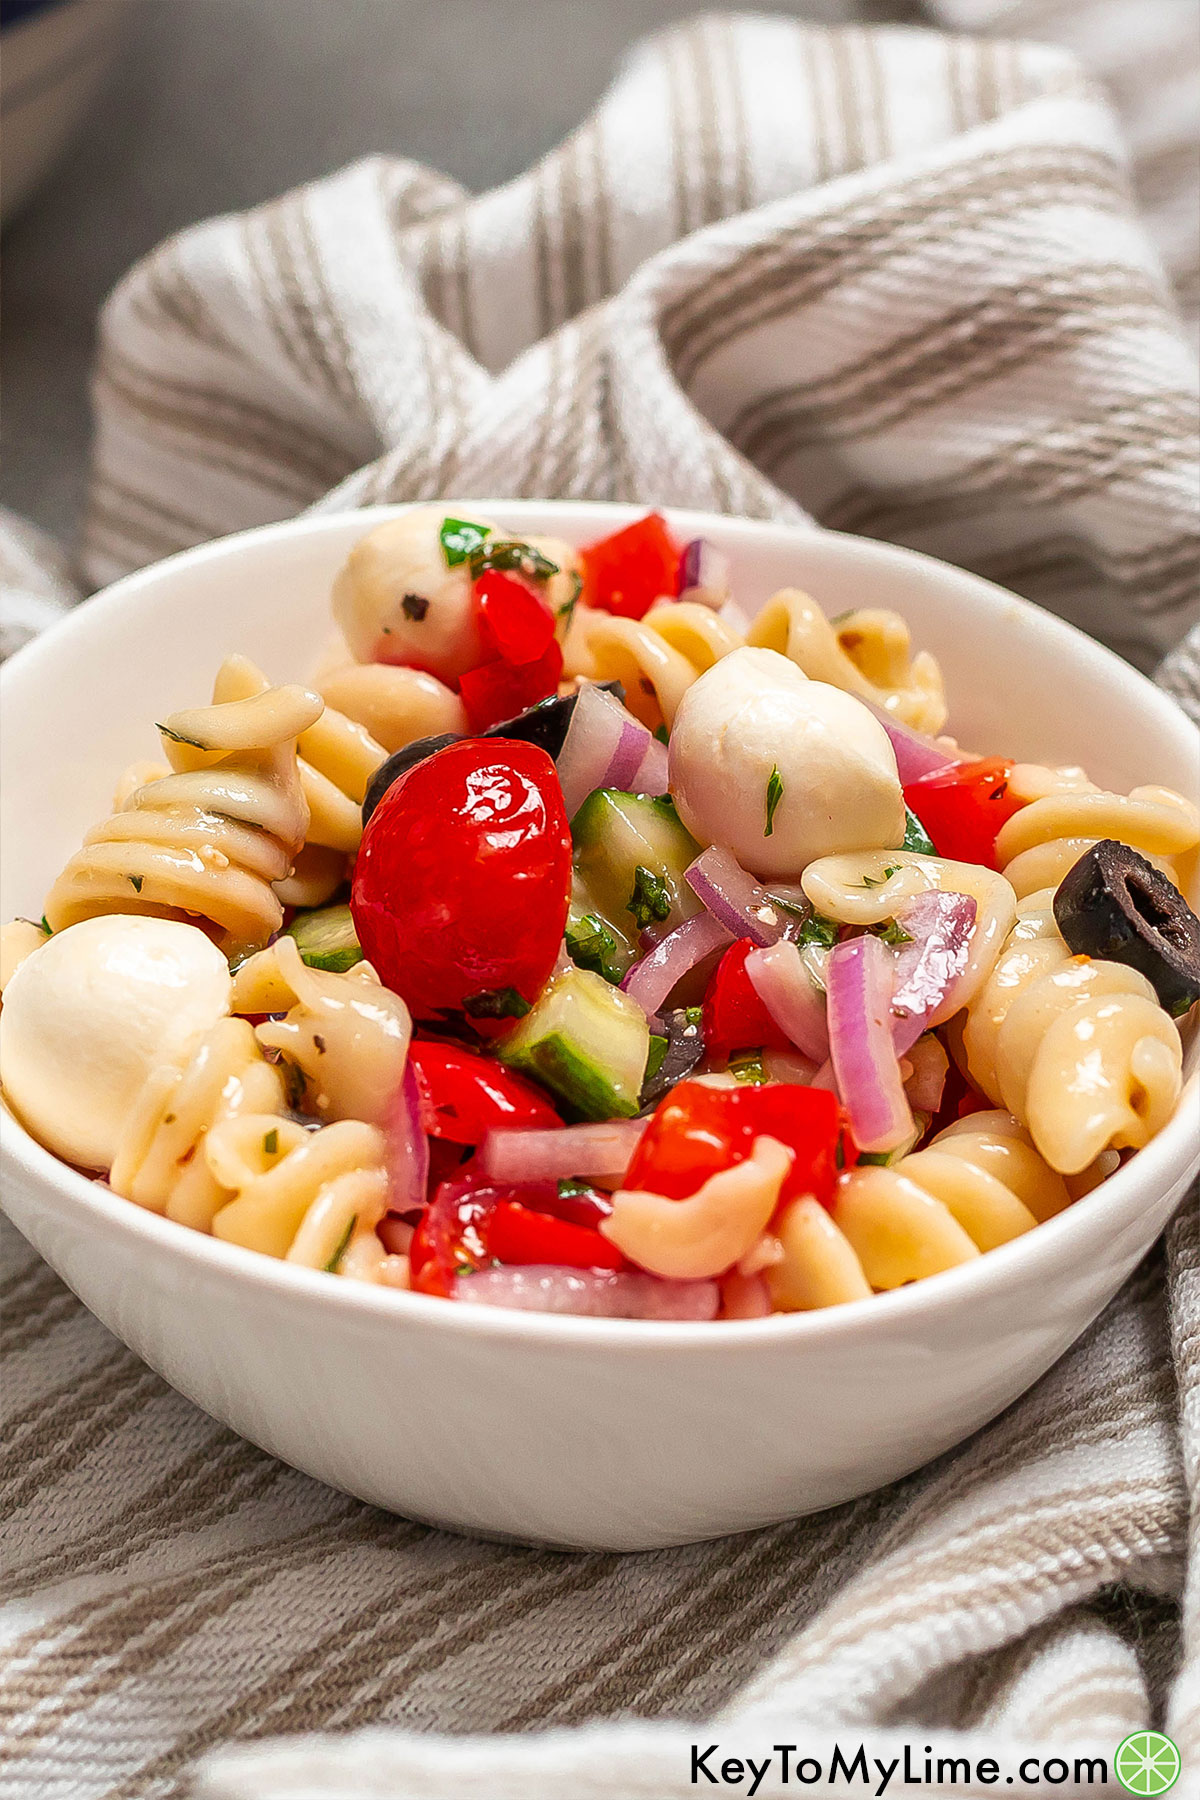 A serving of colorful pasta salad garnished with fresh parsley inside of a small white bowl.